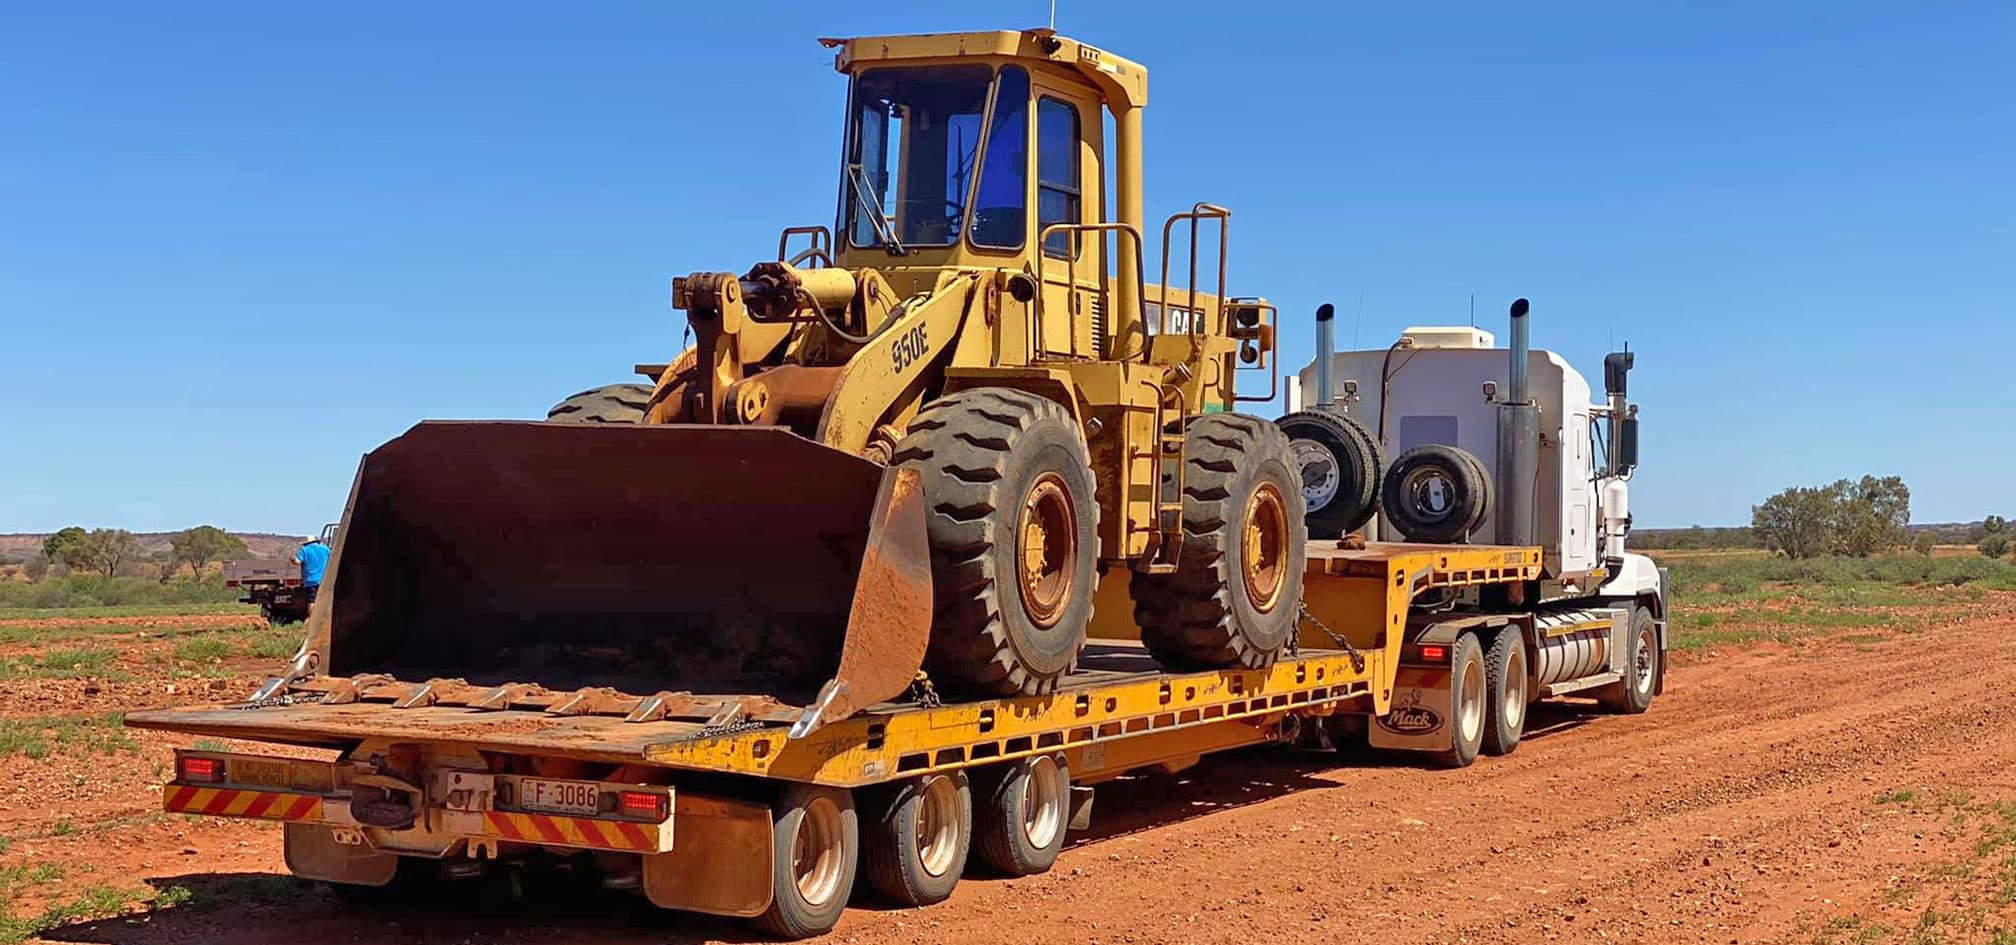 Towing heavy load - Work Machinery NT